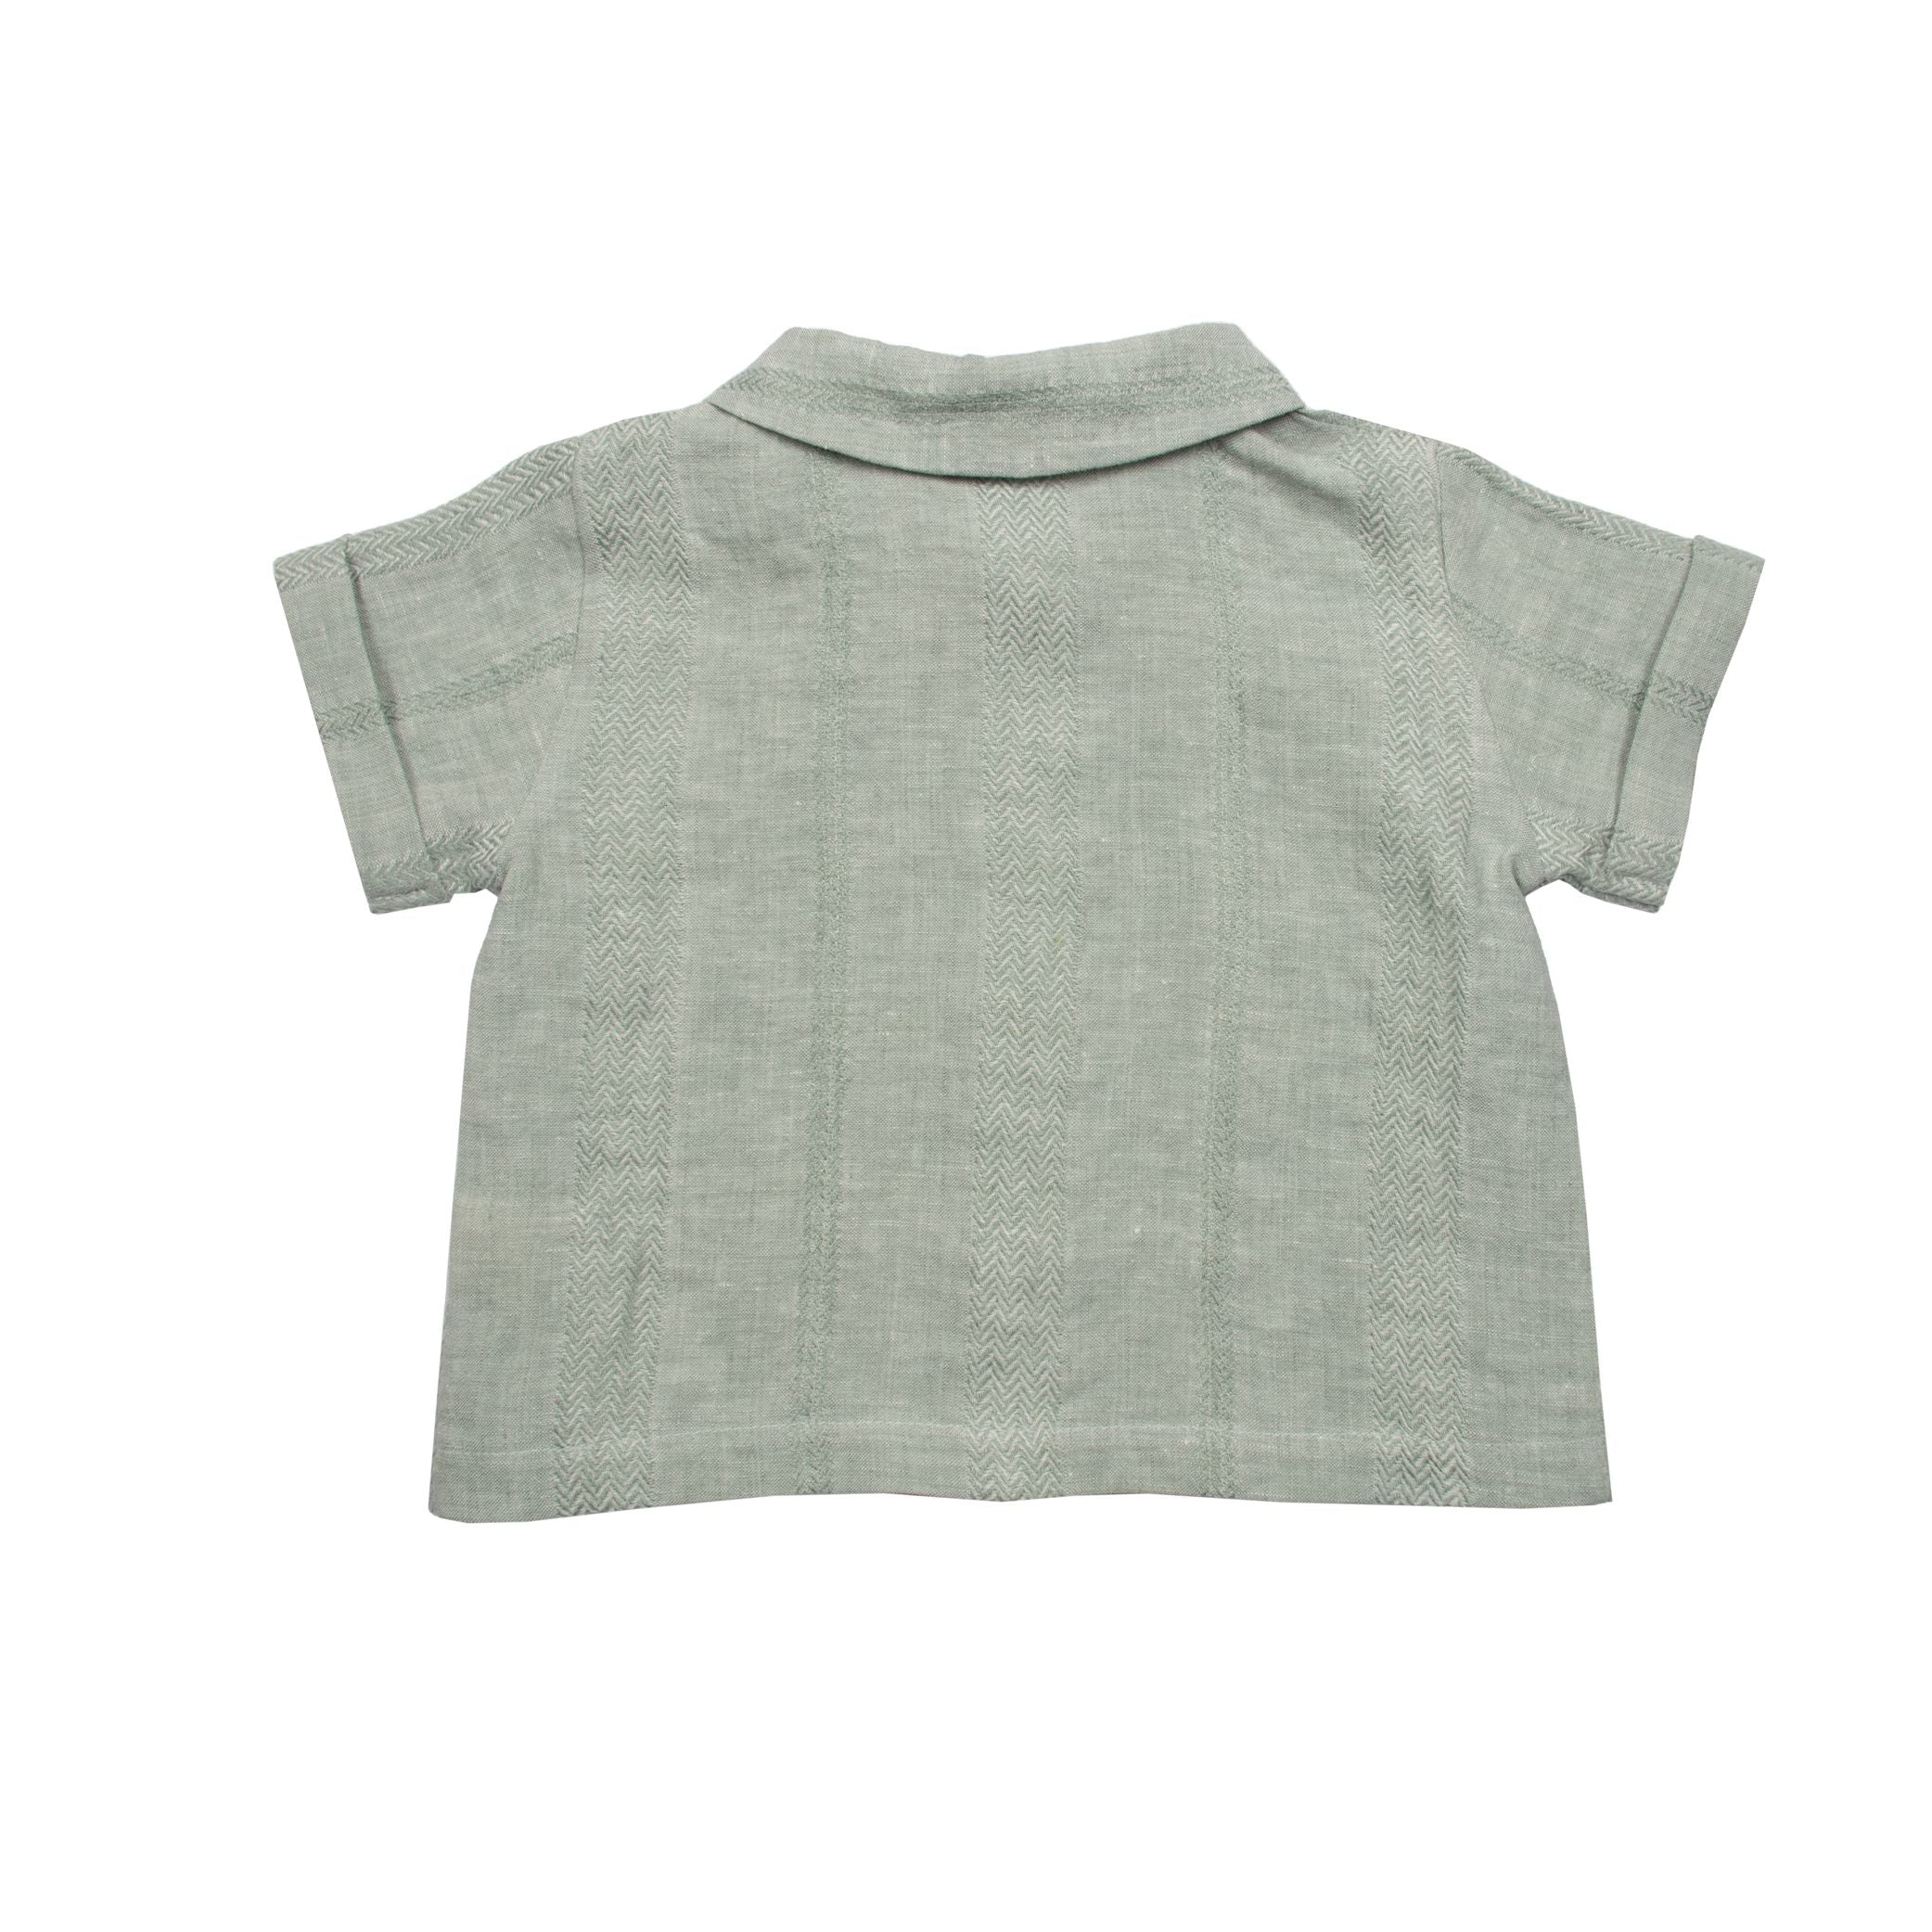 Textured Green Mint Linen polo top and shorts for baby. Gender Neutral outfit for baby for wedding.. made in portugal. Suuky Porto certified products. Beautiful for a garden wedding. Baby inspired outfit for holiday in Florida, Boca Raton. Ships to Canada and United States of America, Duty Free. Organic, natural Materials. First Birthday Gift for baby girl. Sustainable luxury for baby & toddler.